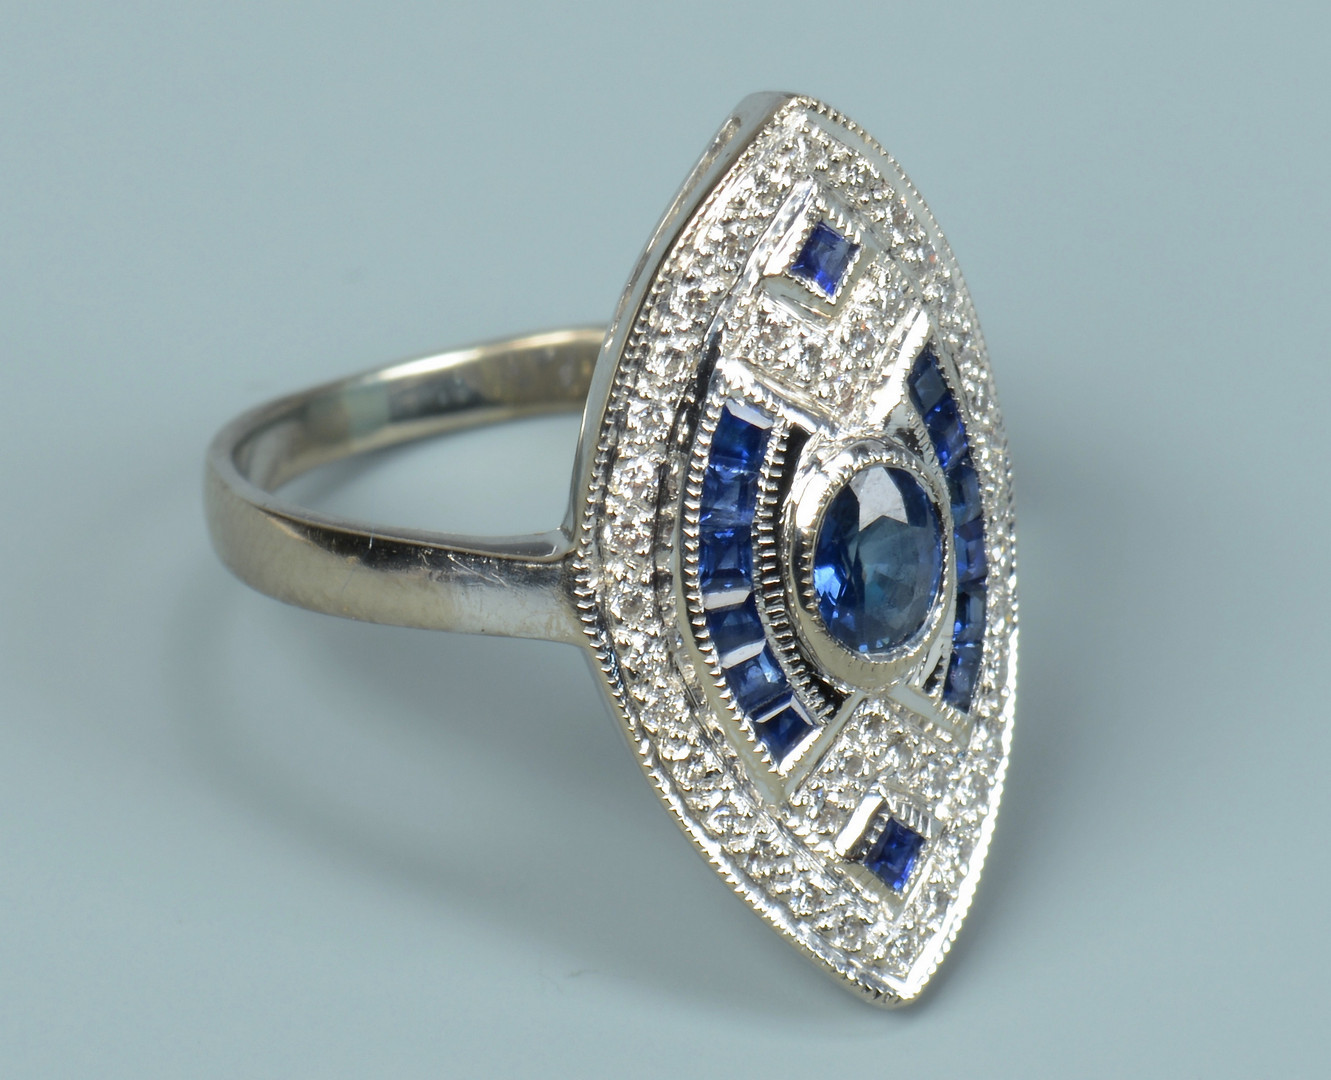 Lot 801: Two Art Deco style Rings